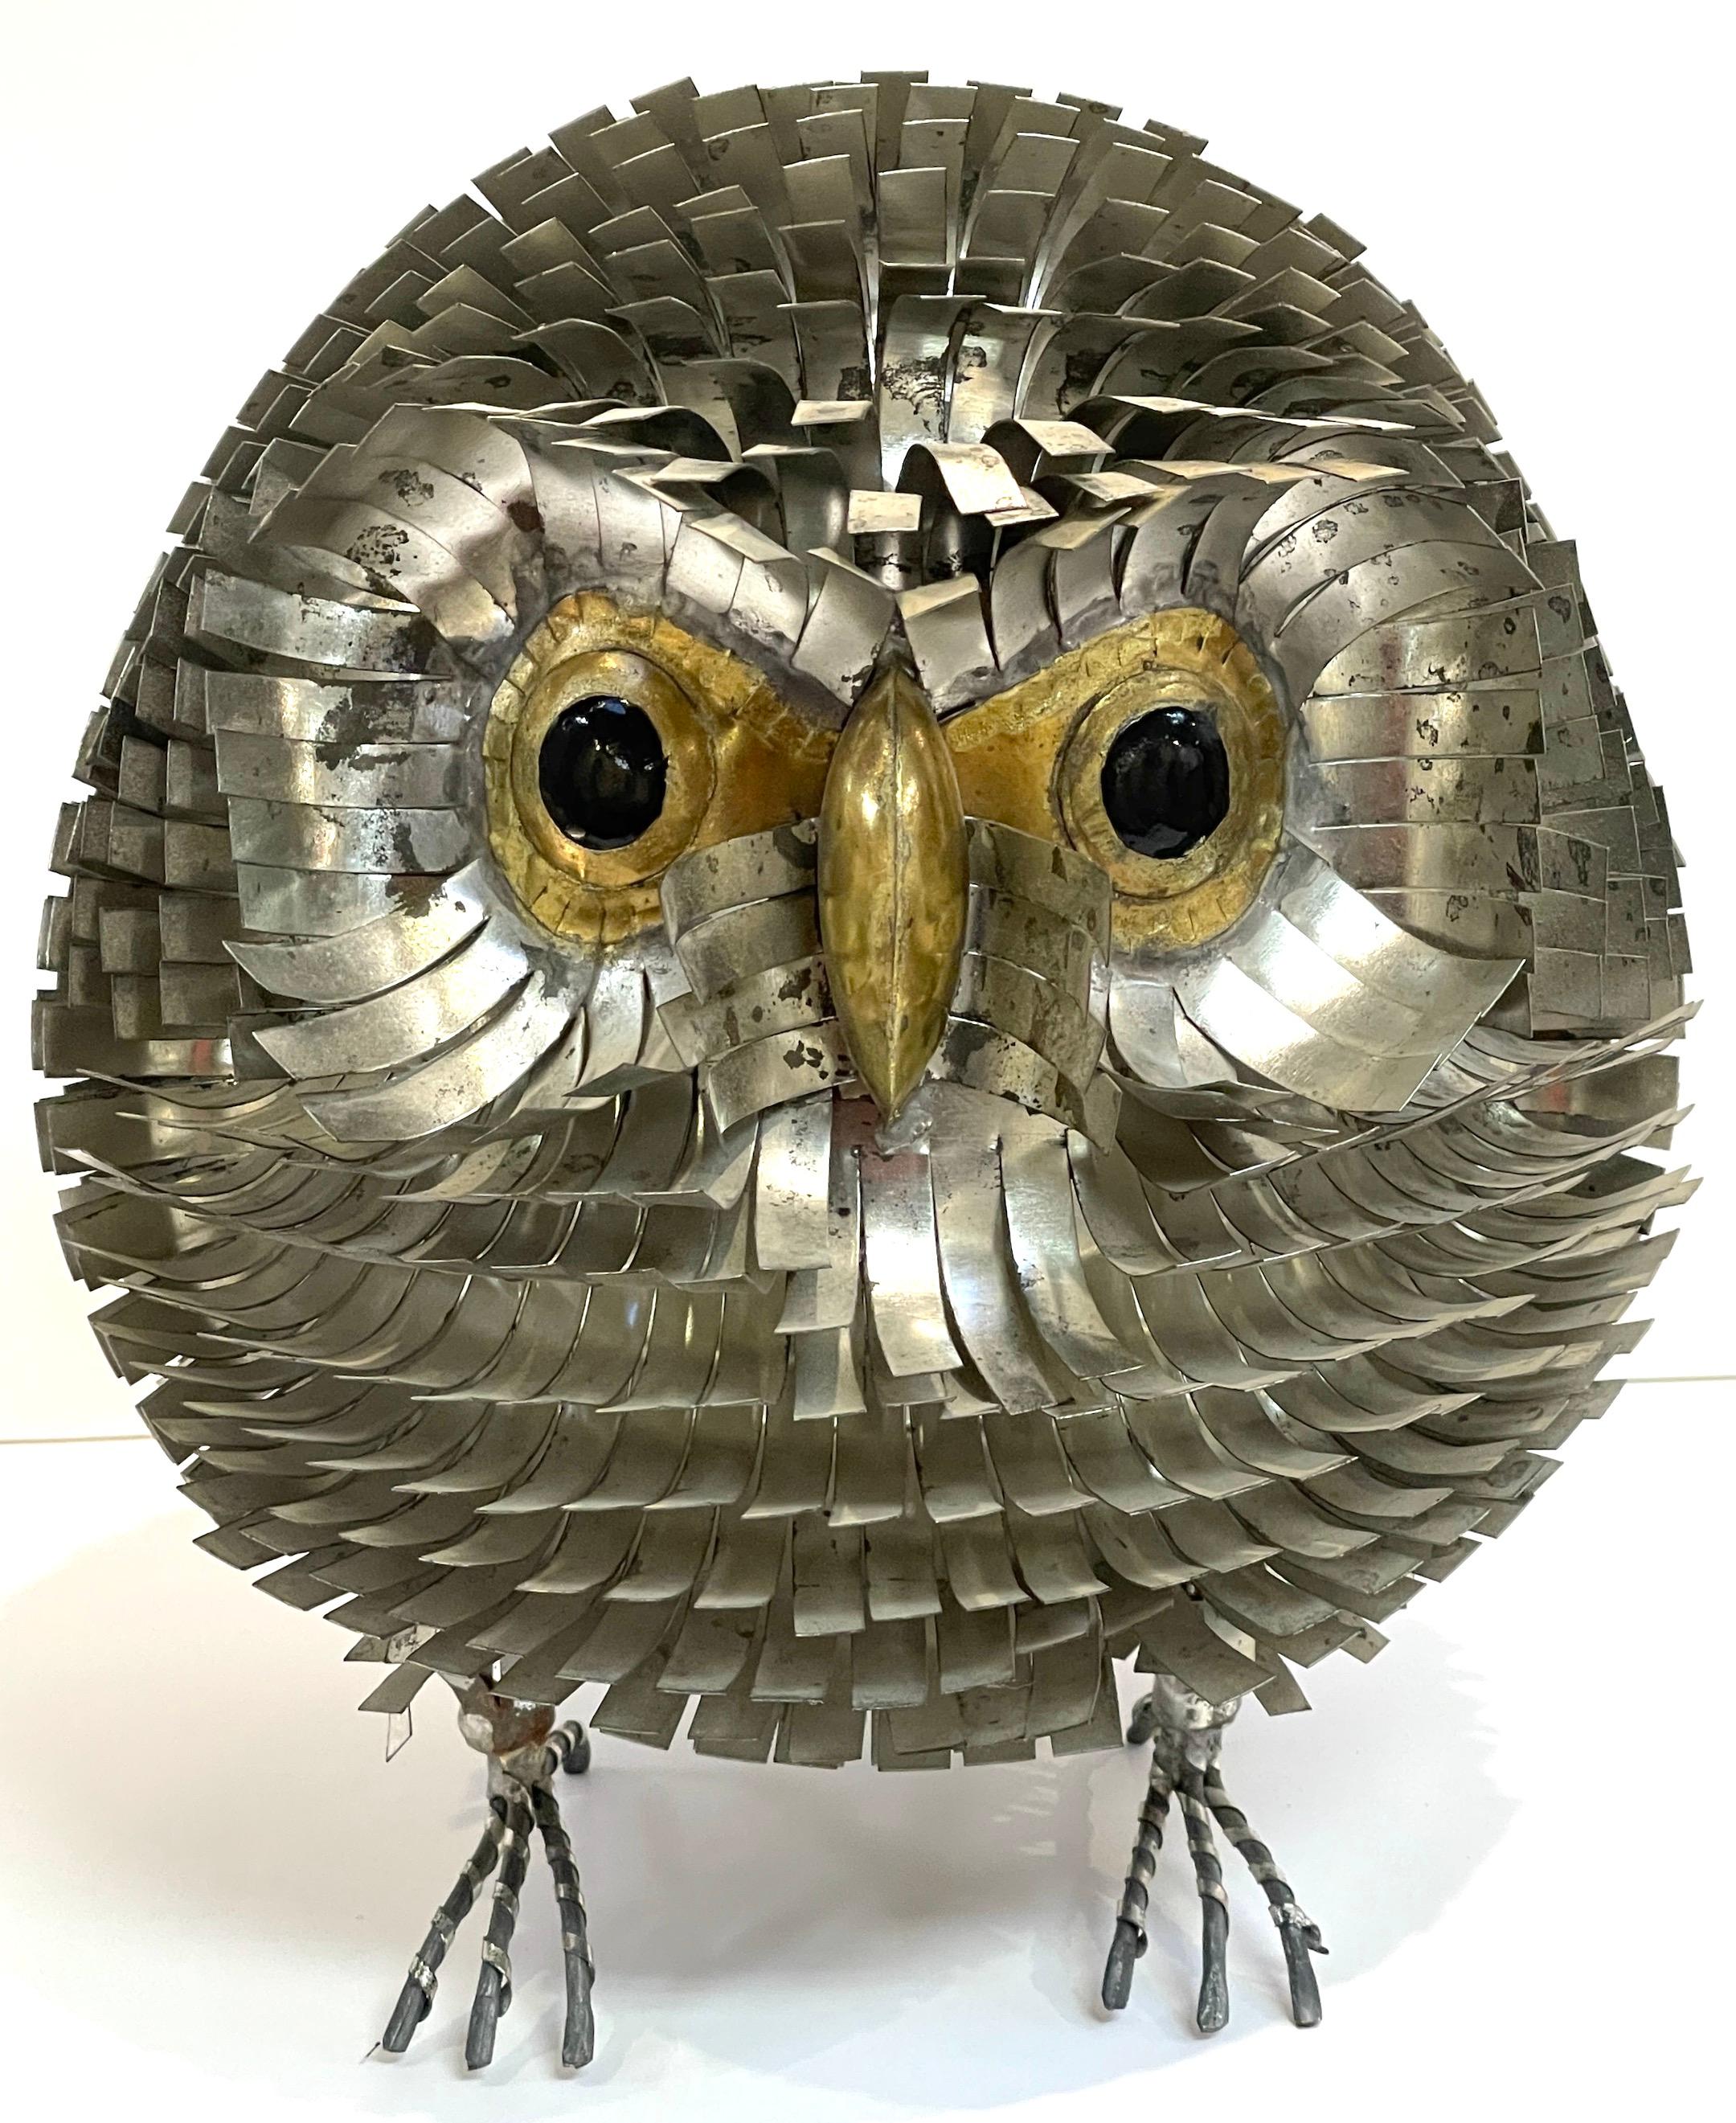 Large Brutalist Metal Work Figure of an Owl, Attributed Sergio Bustamante
Mexico, 1970s

A large intricate Brutalist sculpture of a standing owl, attributed to the renowned Mexican artist Sergio Bustamante. Crafted in the 1970s, this sculpture